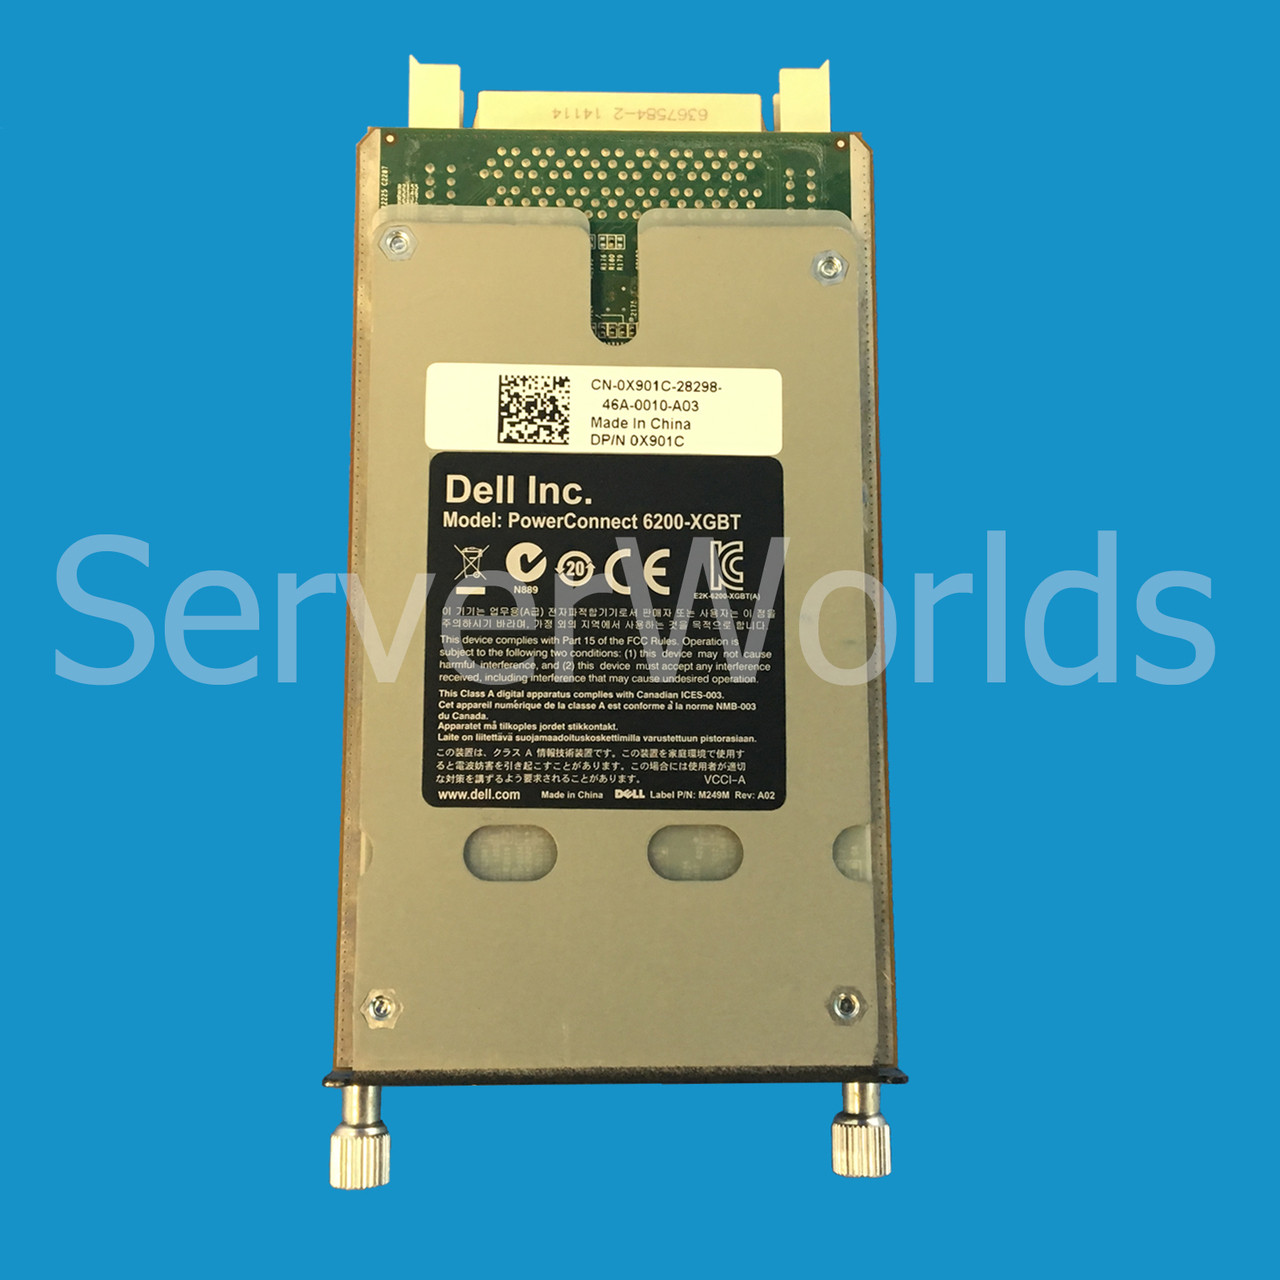 Dell X901C Powerconnect 6200-XGBT Dual Port 10GbASE-T Module